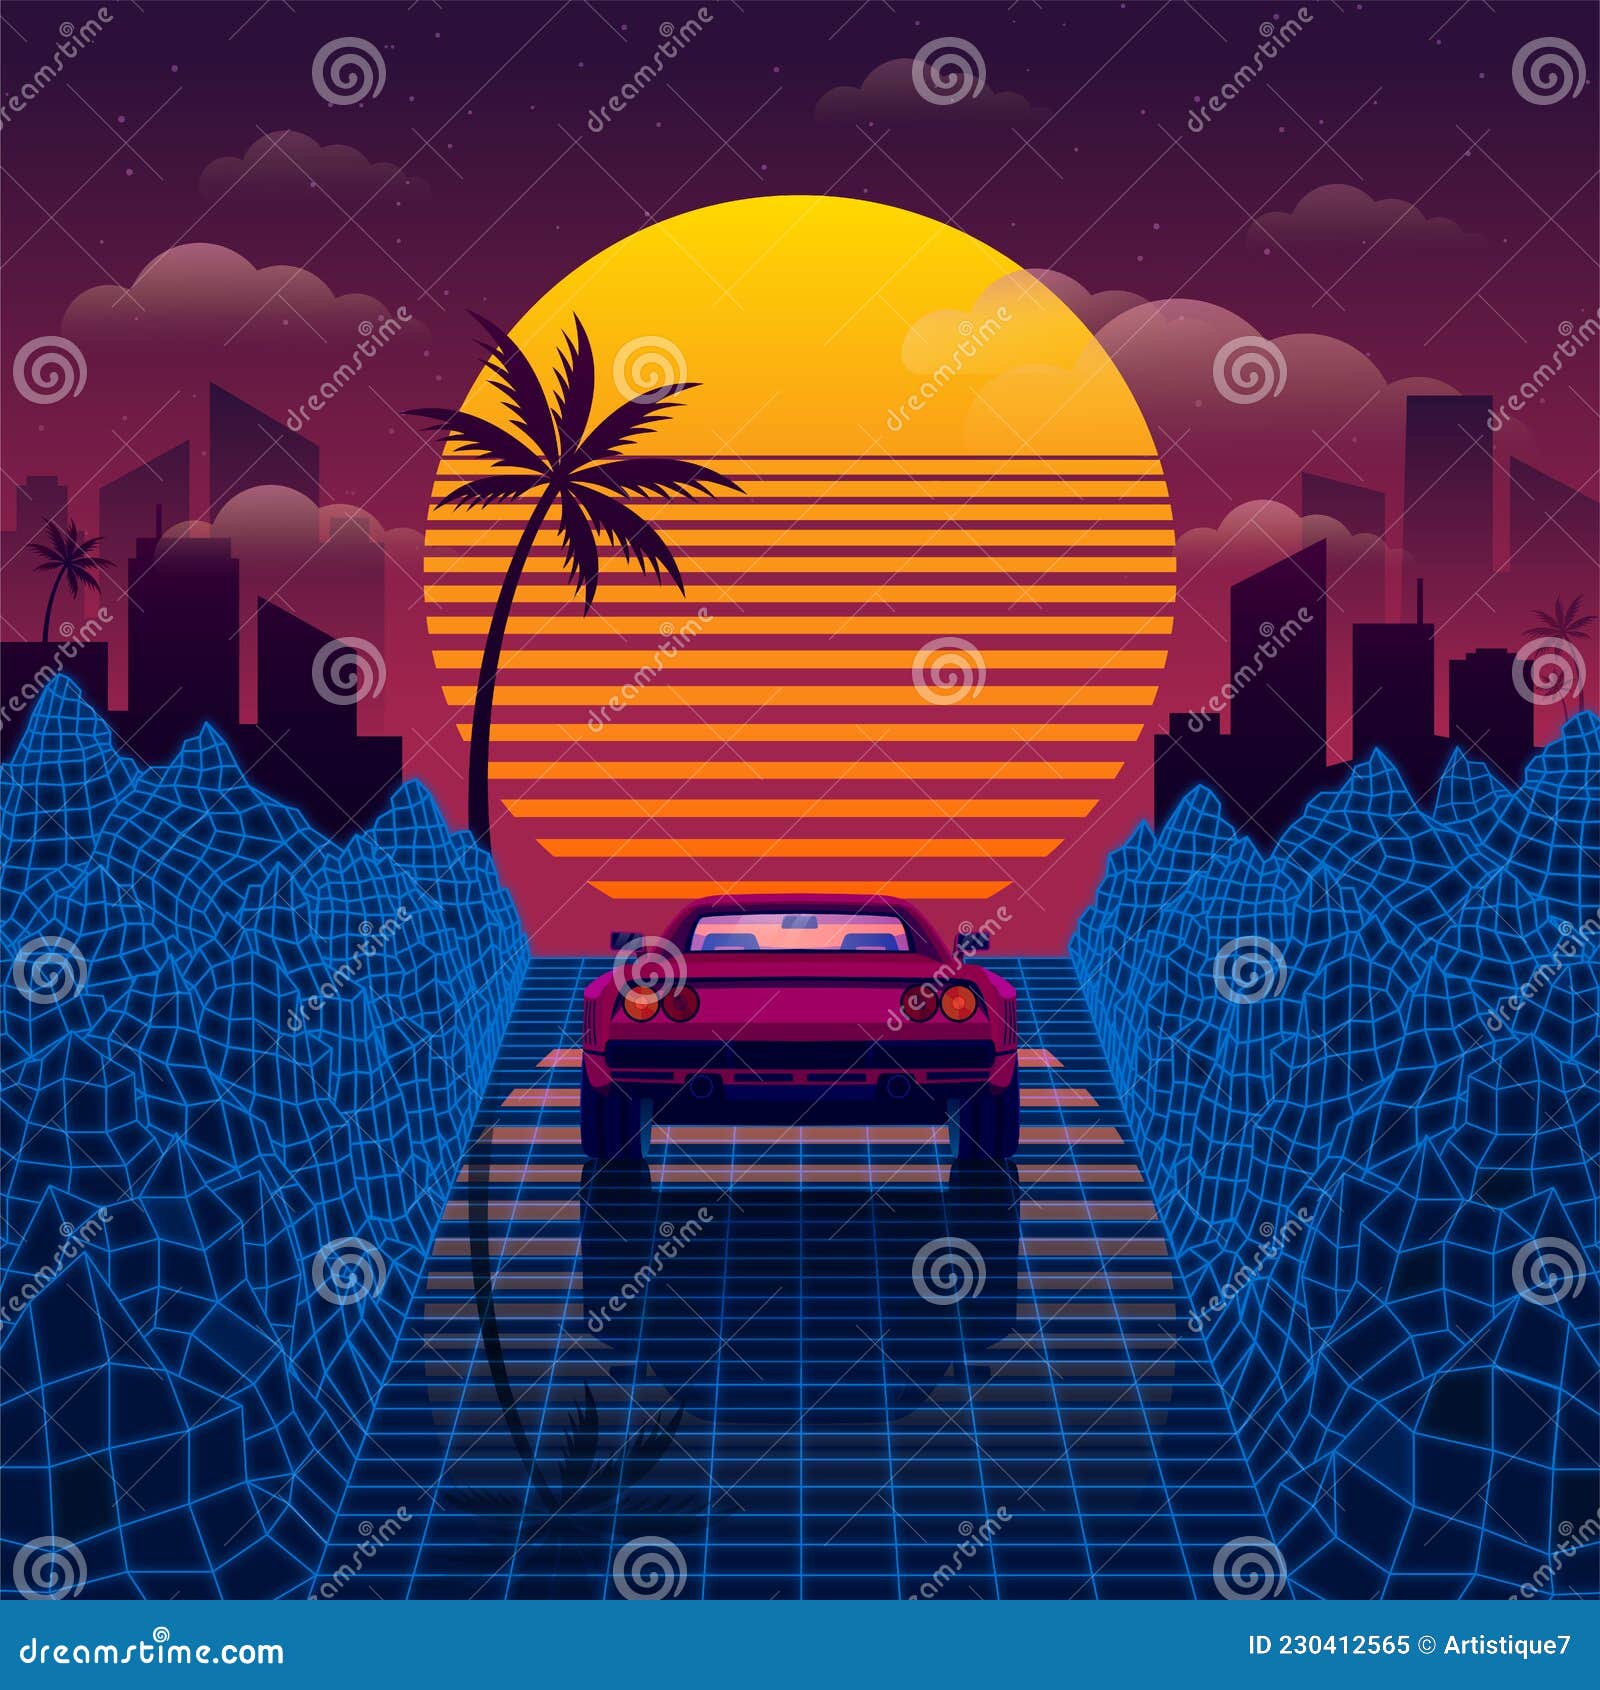 retro car on the blue road among 3d mountains synthwave or retrowave style